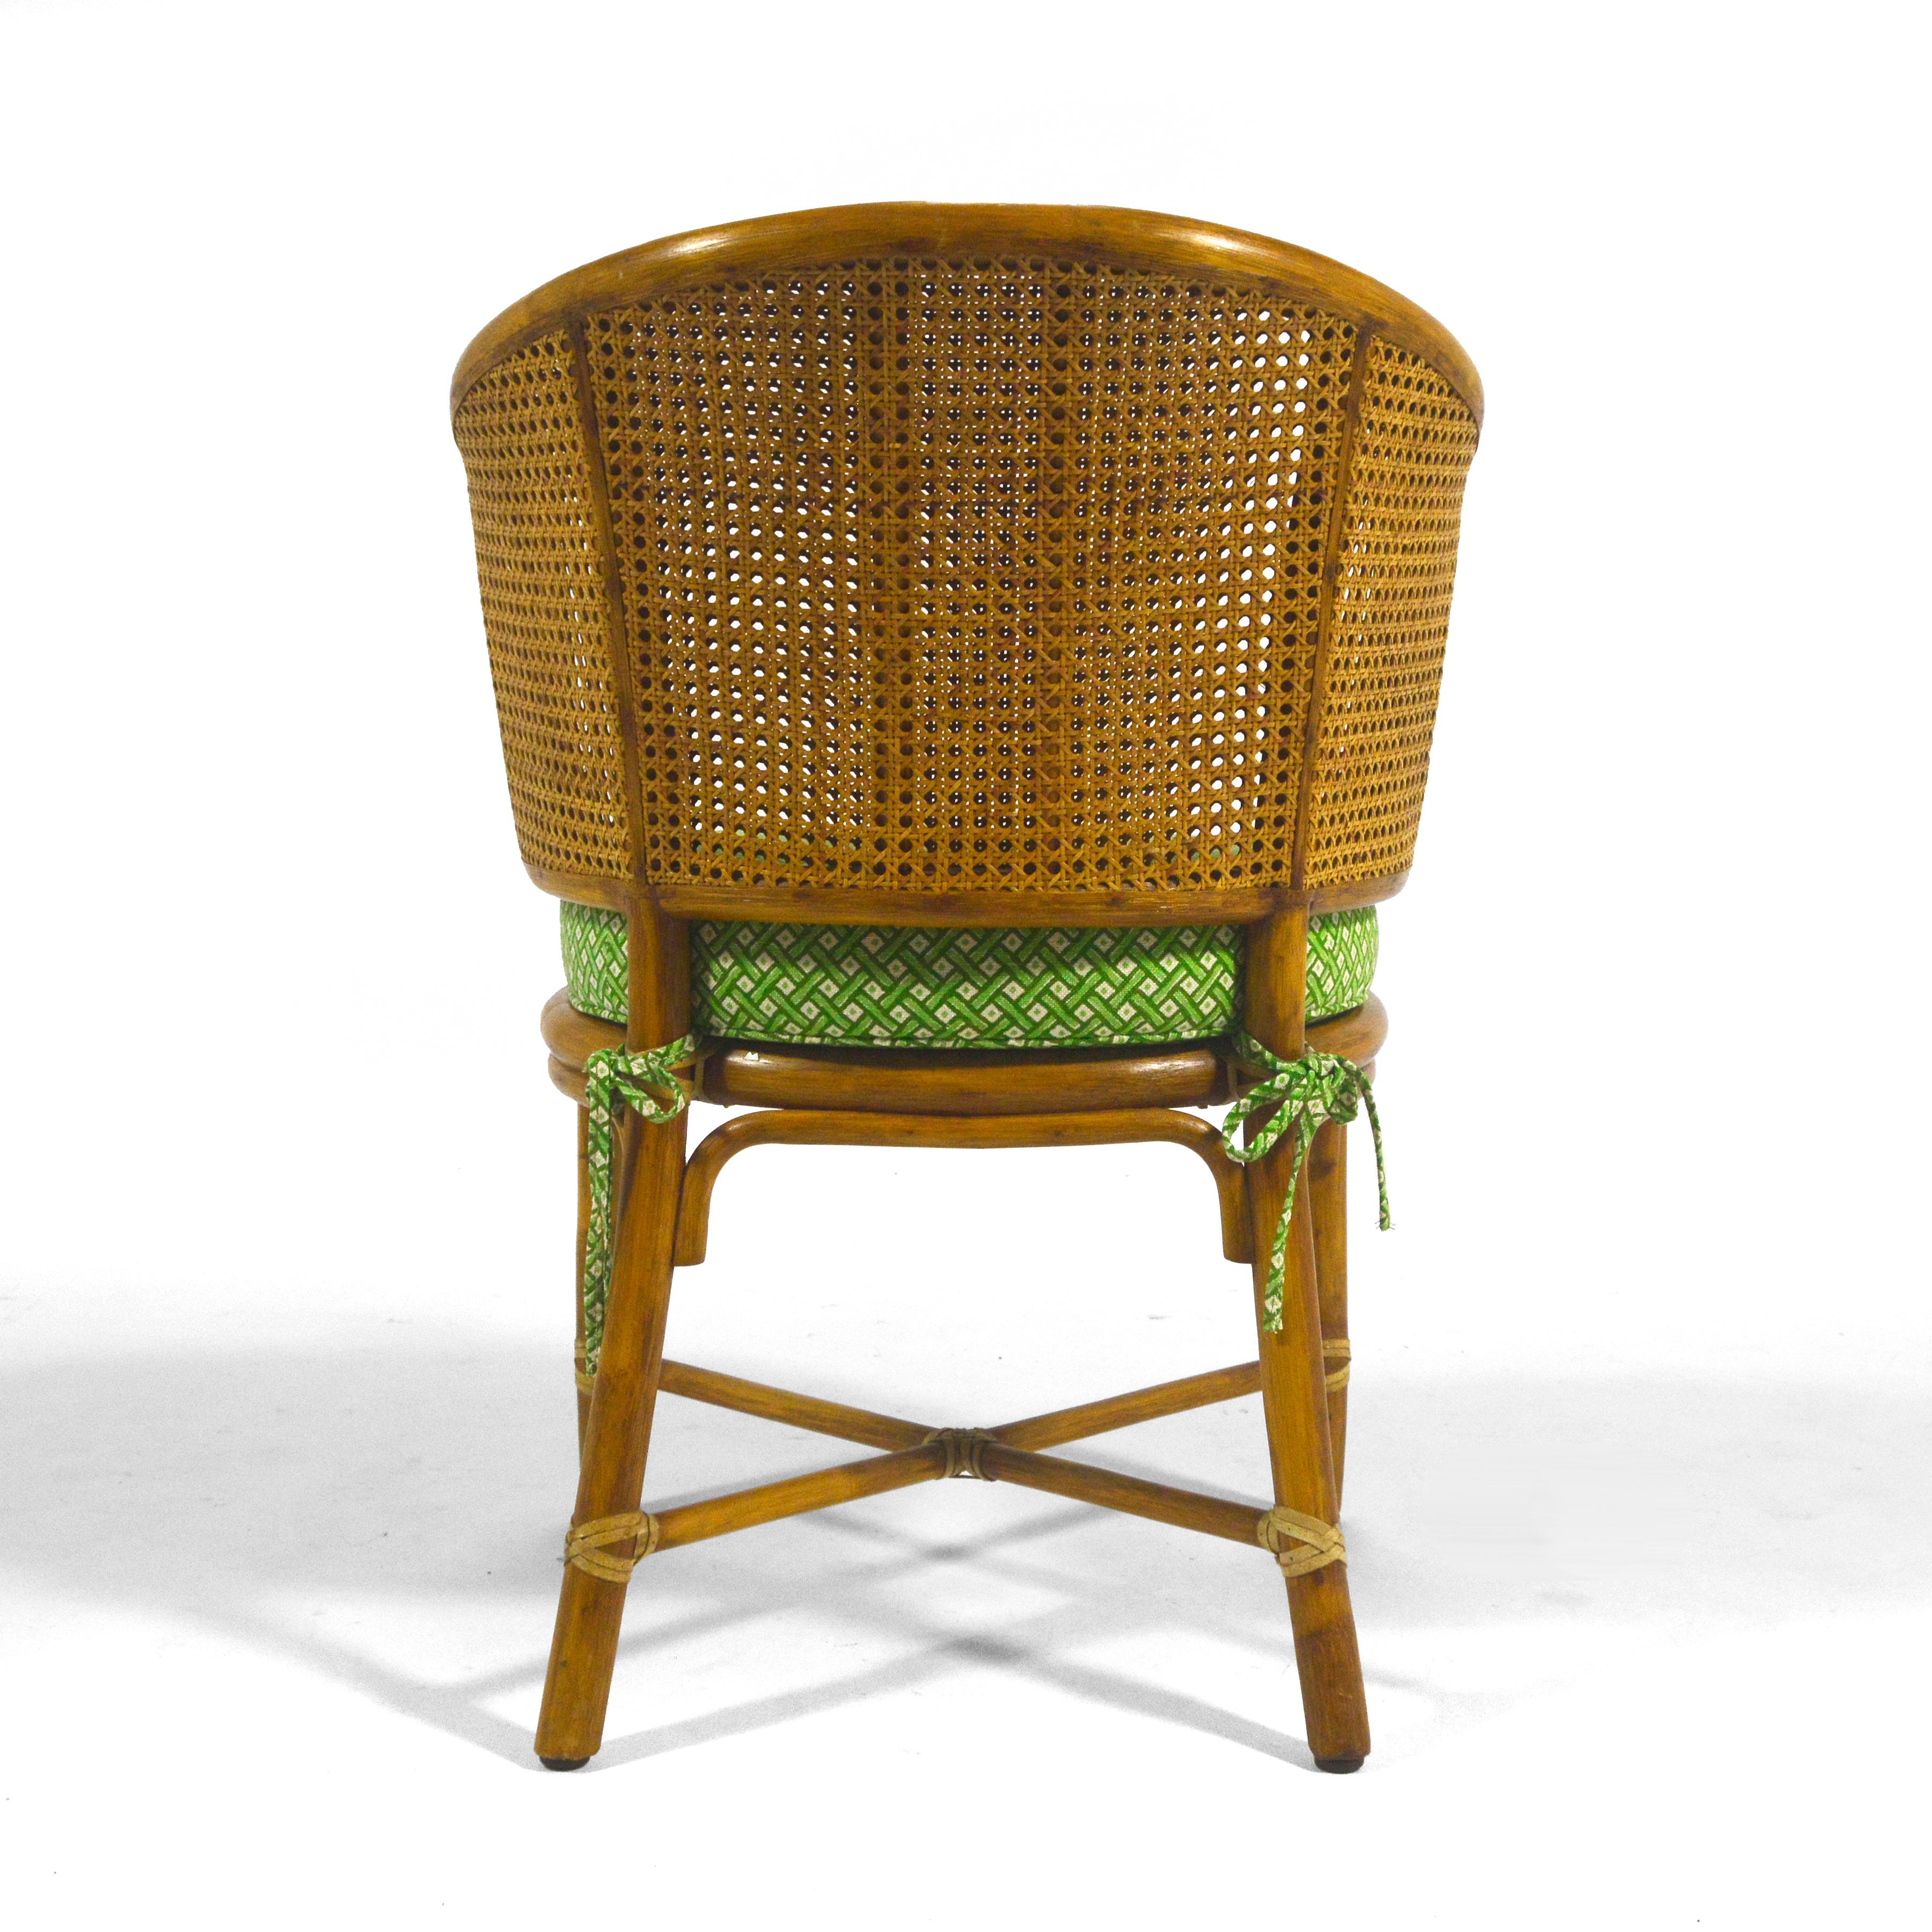 Upholstery Elinor McGuire M-86 Rattan & Cane Chair For Sale